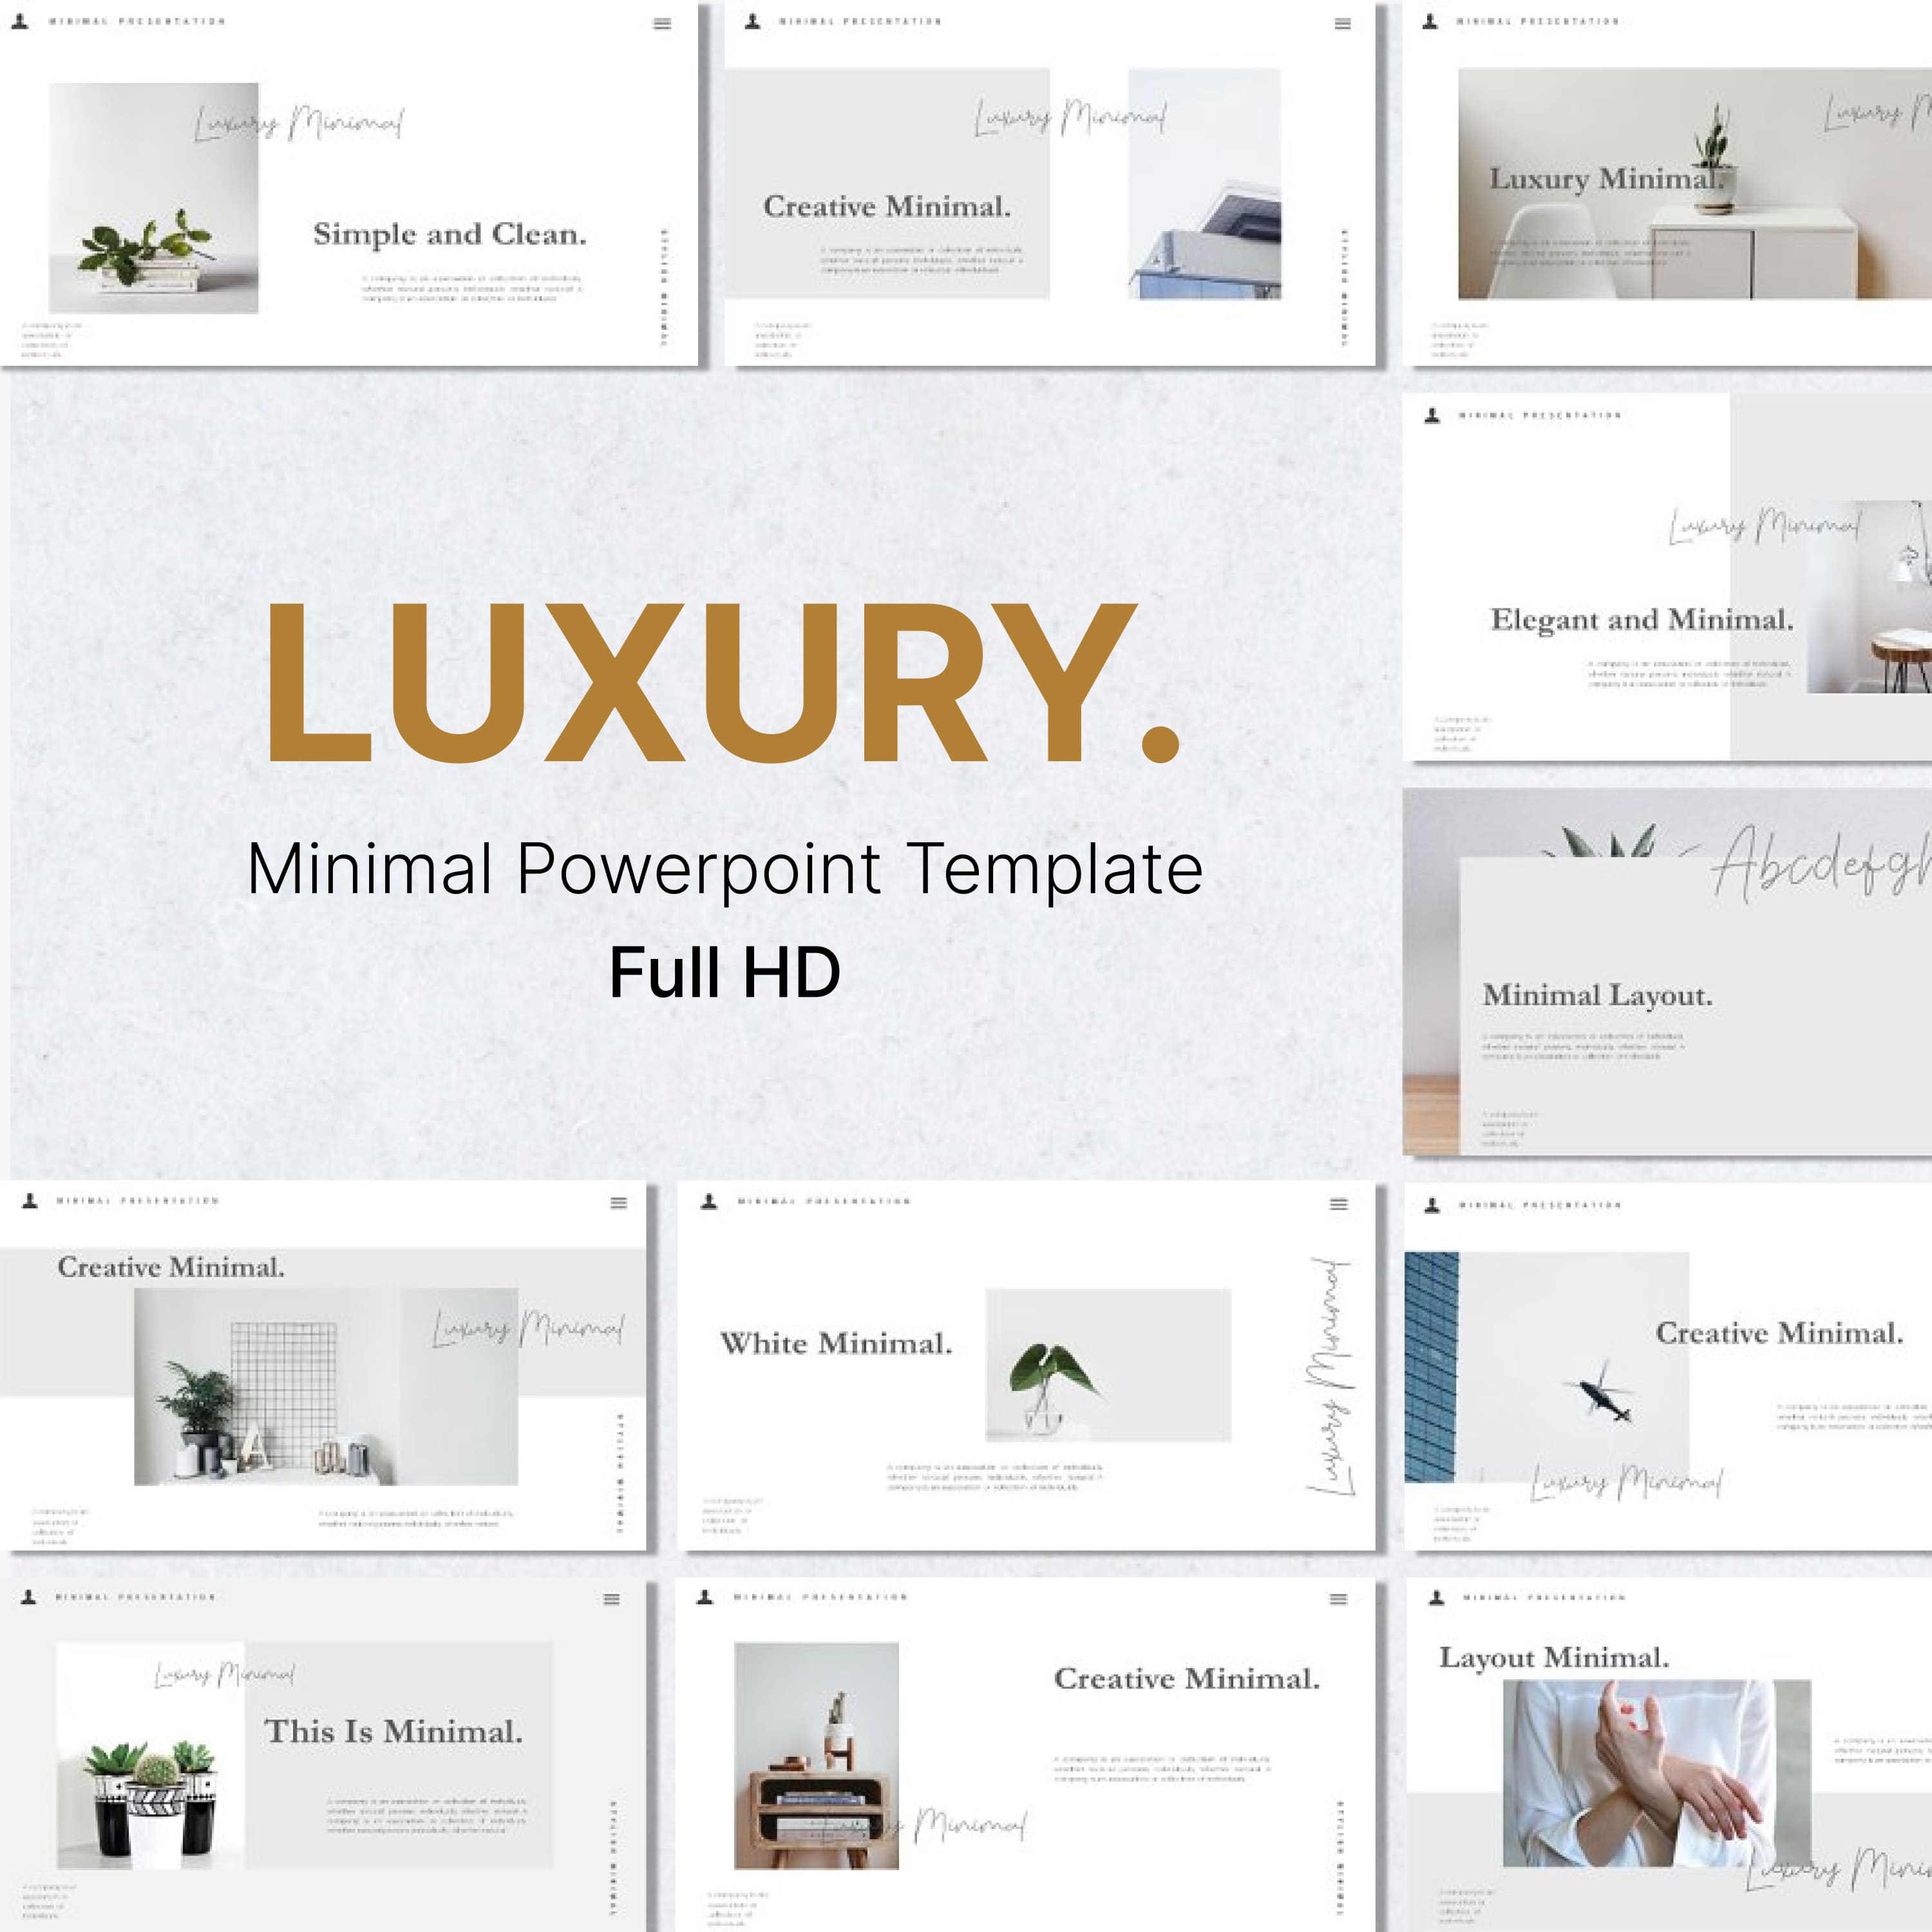 Luxury minimal powerpoint template - main image preview.